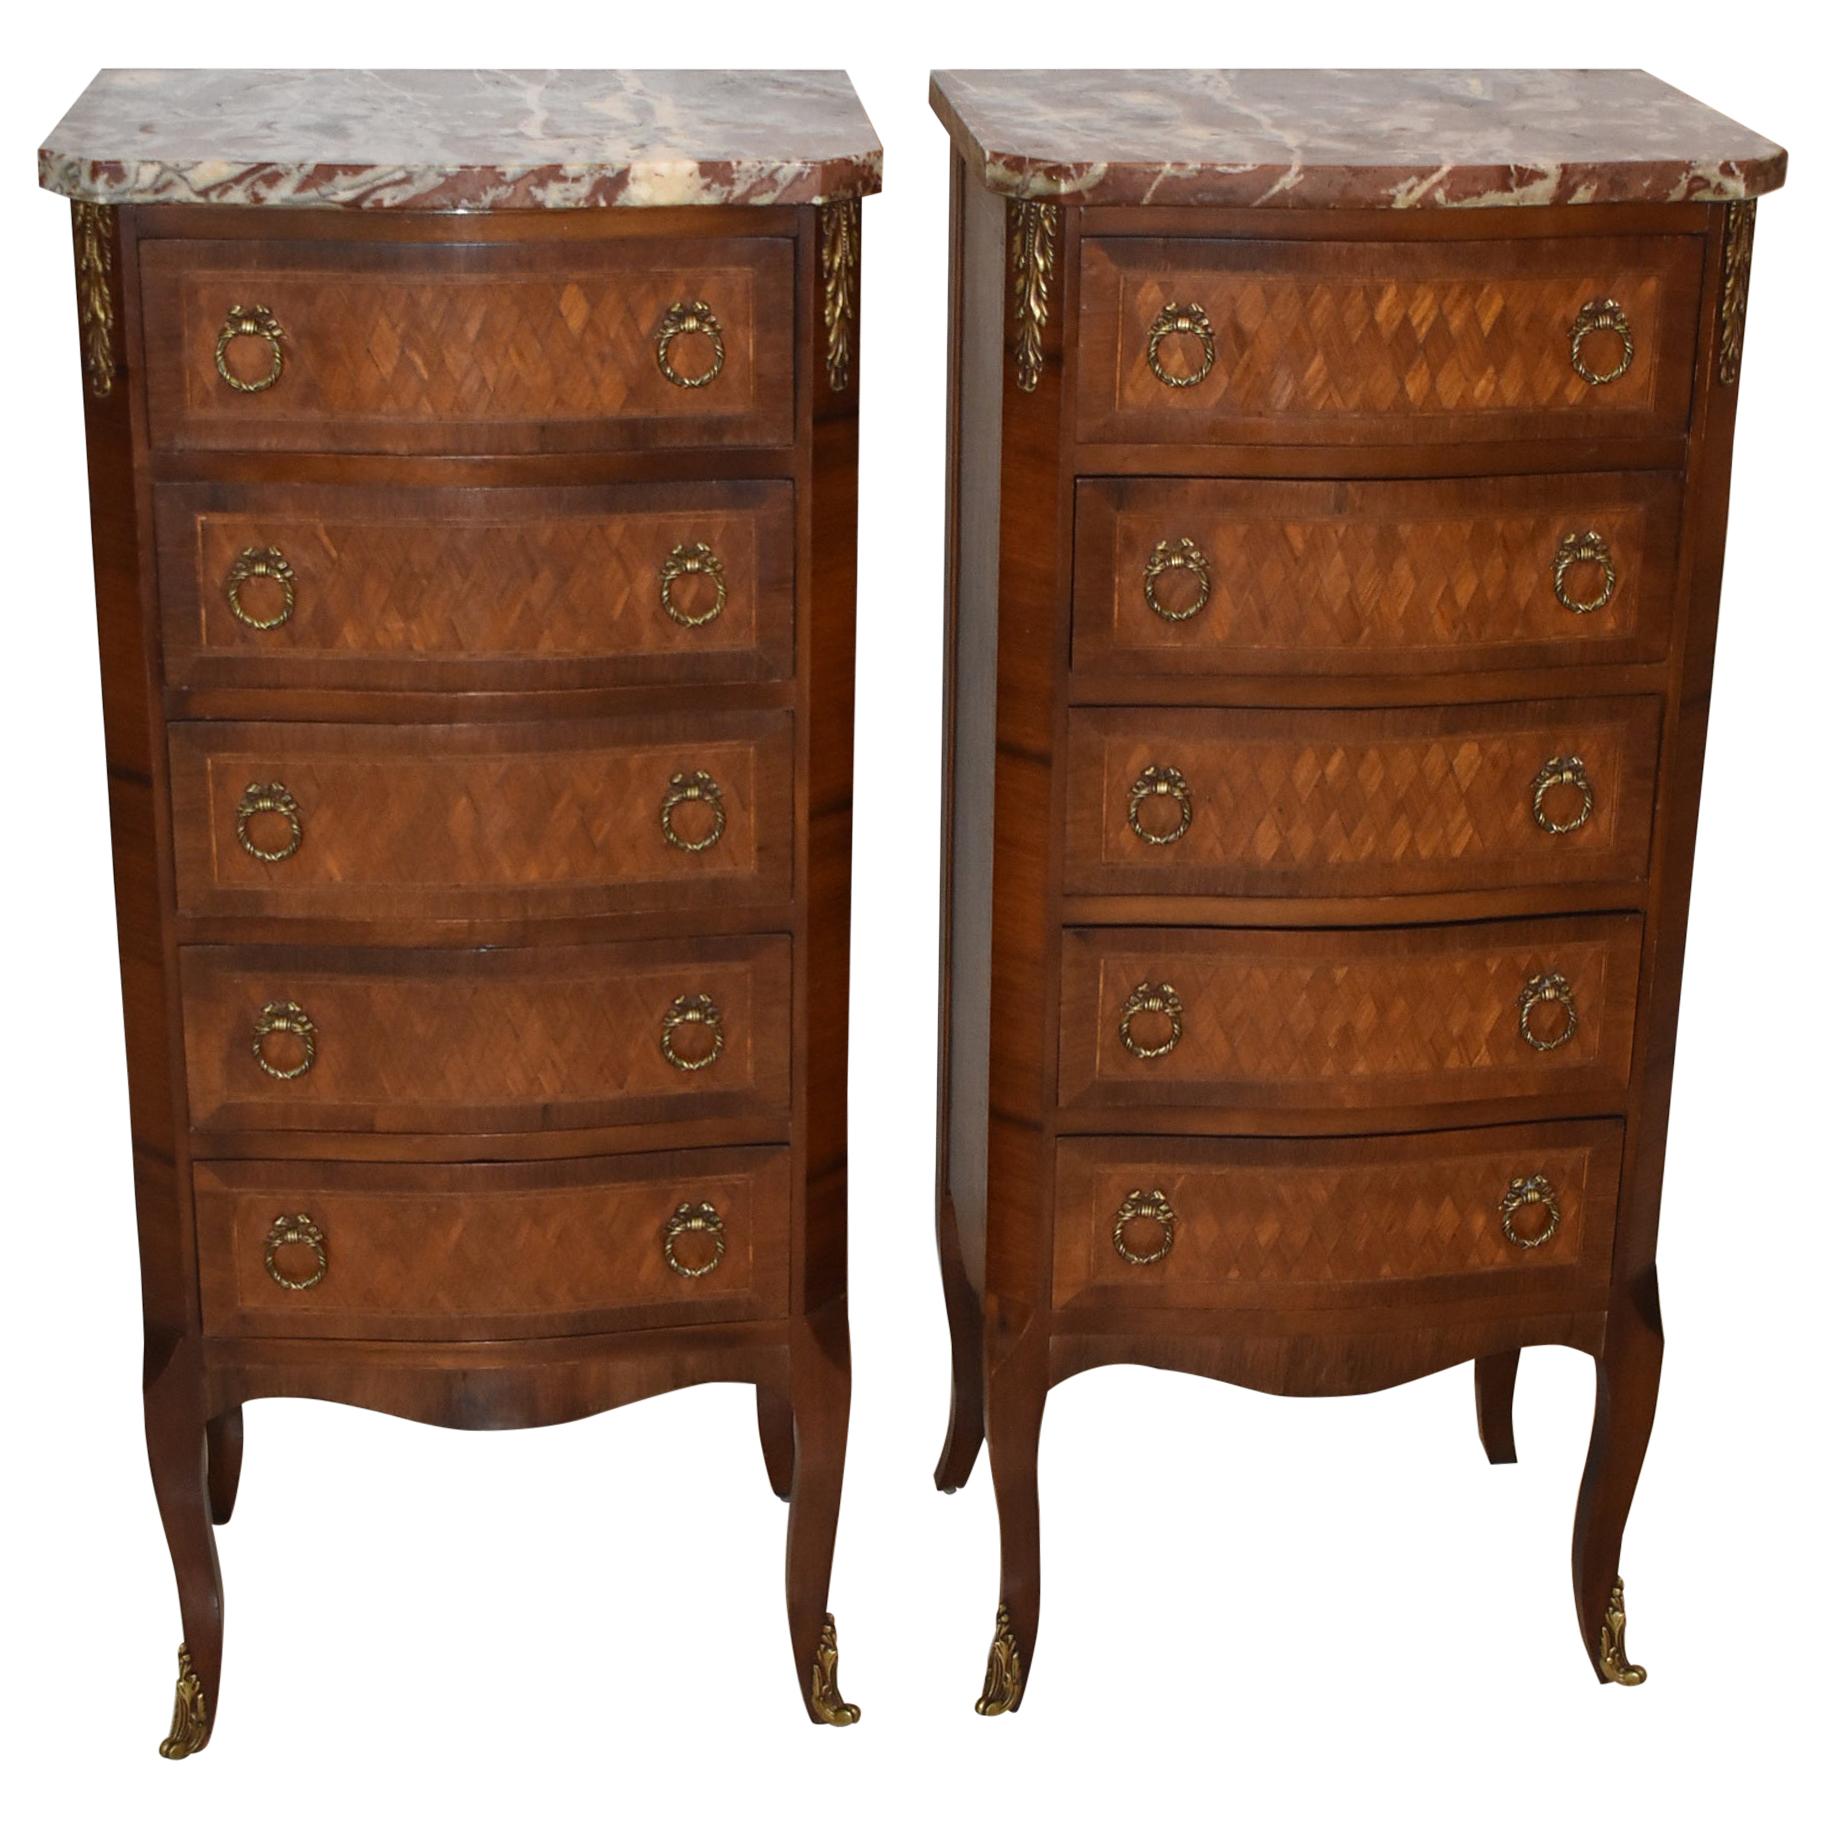 Pair of French Style Lingerie Five-Drawer Walnut Chests with Marble Tops